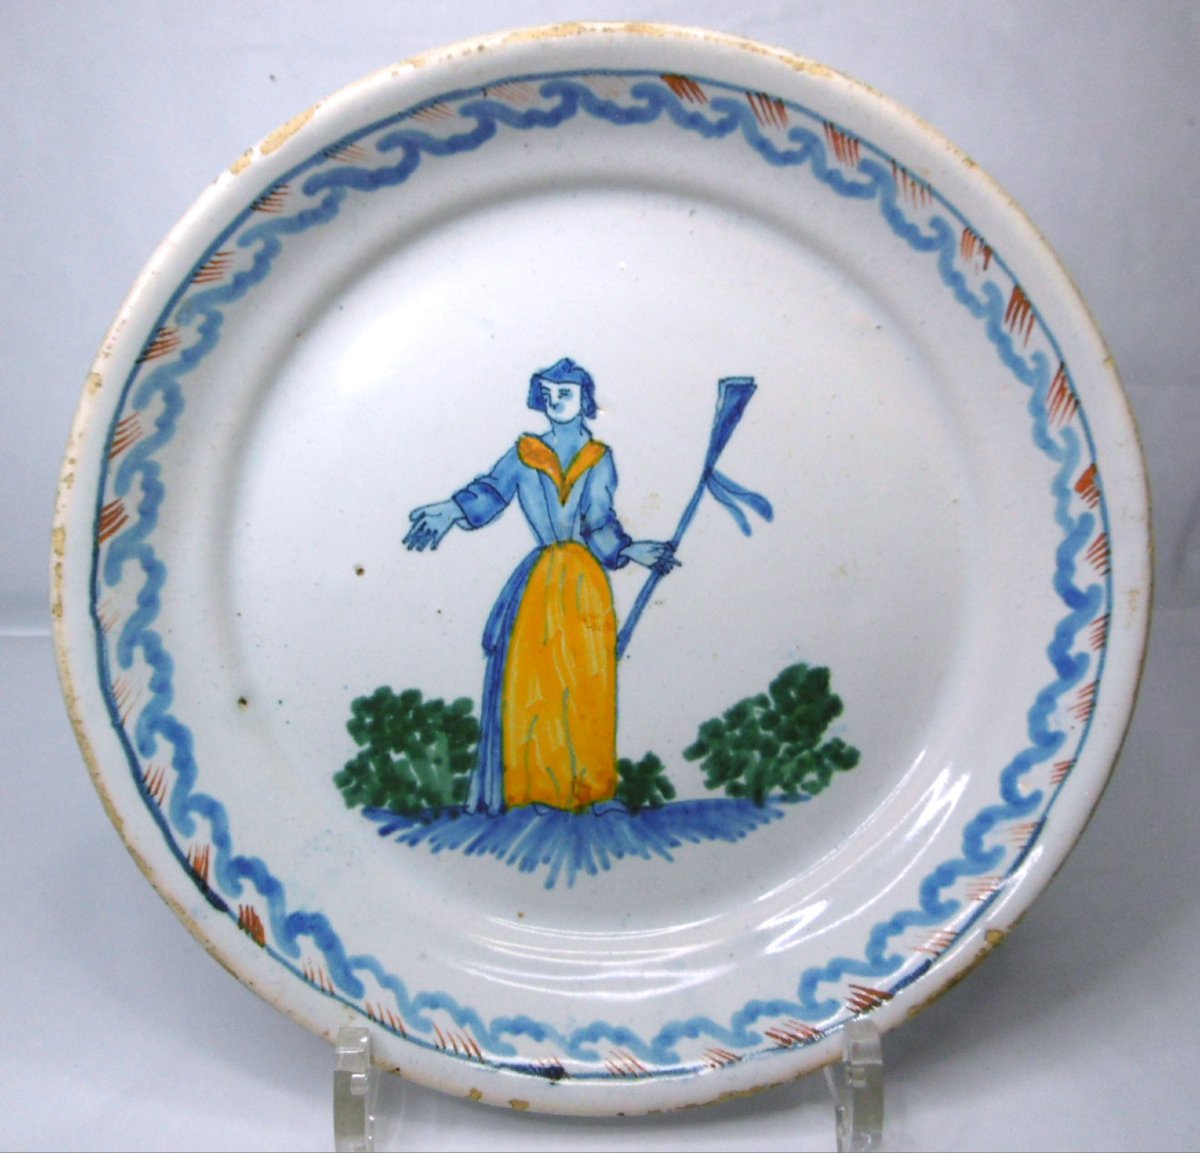 18th Century Nevers Earthenware Plate